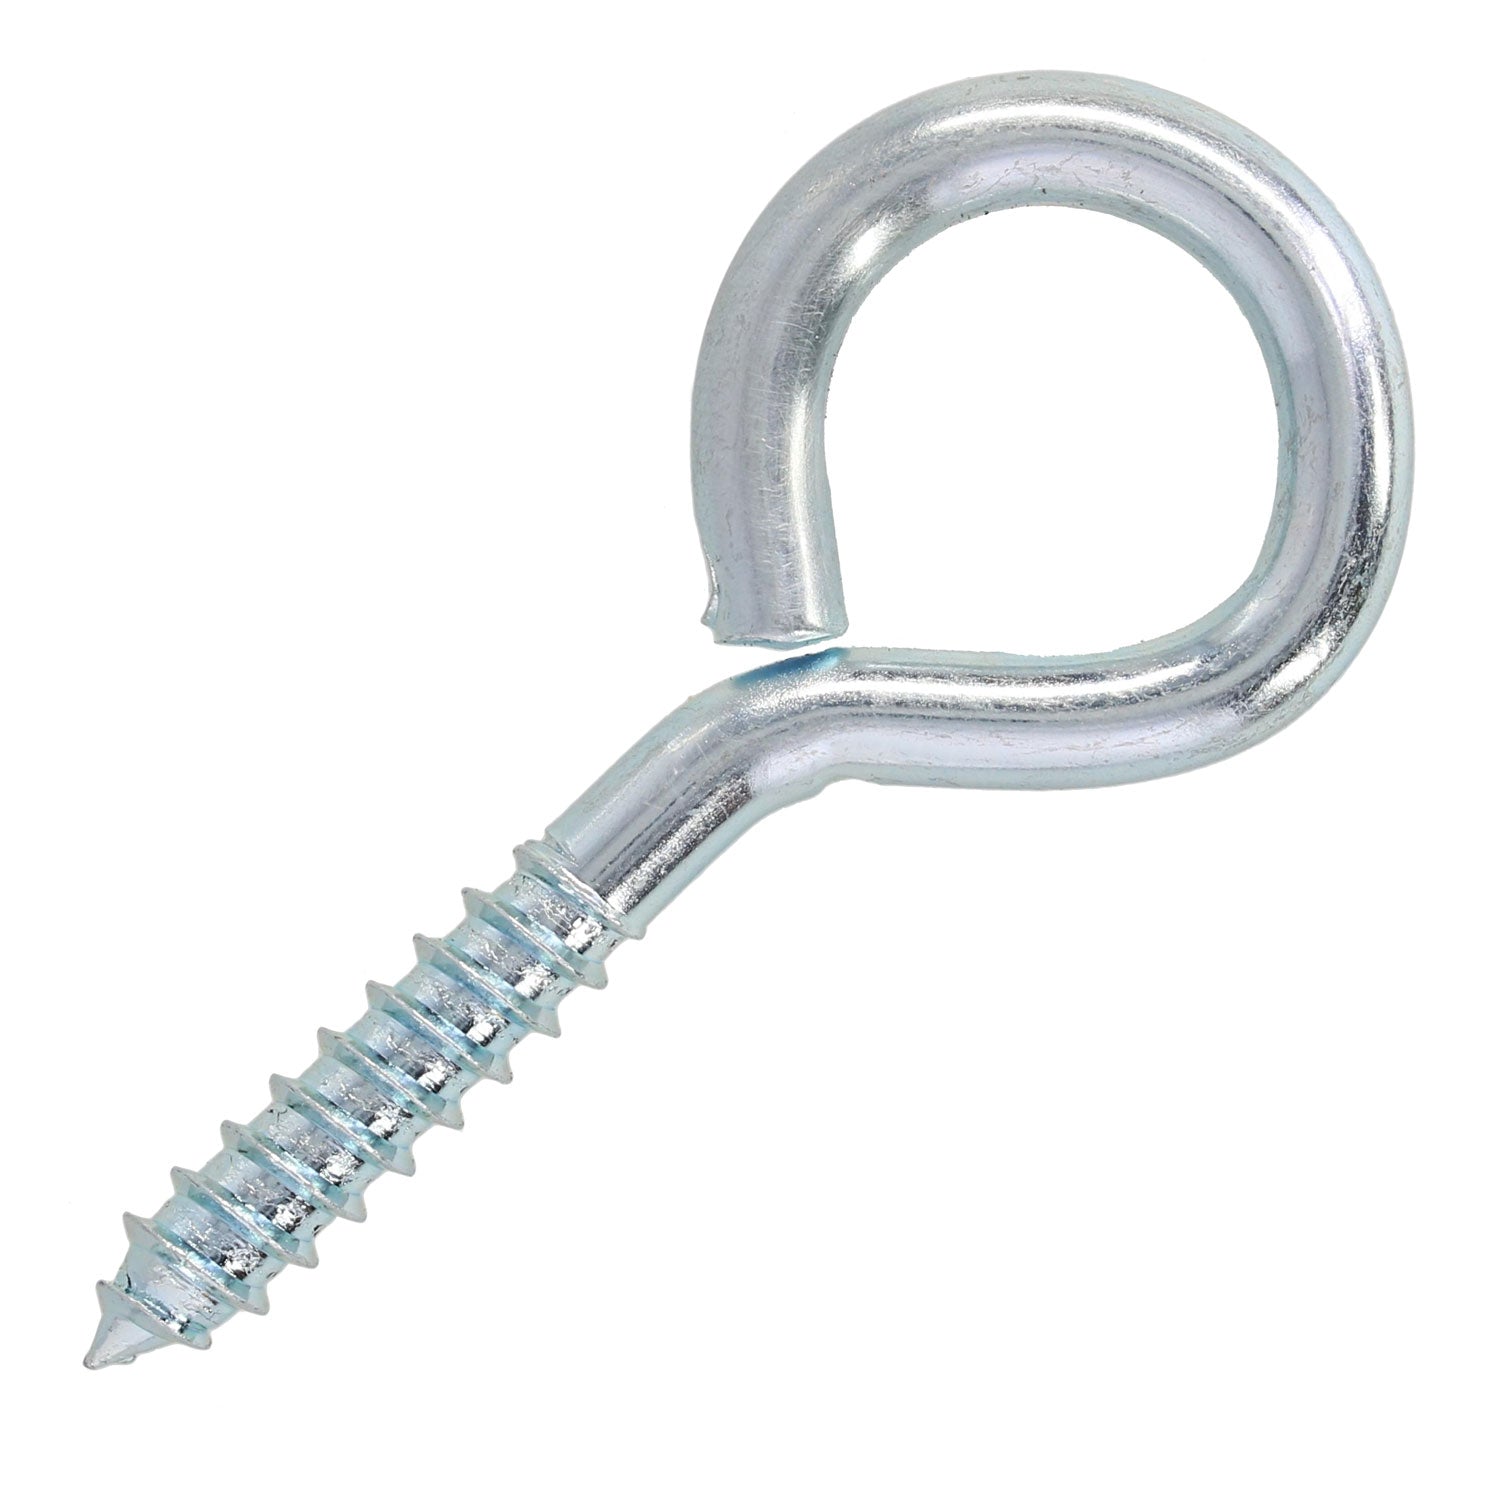 Zinc Plated Formed Lag Eye Bolts